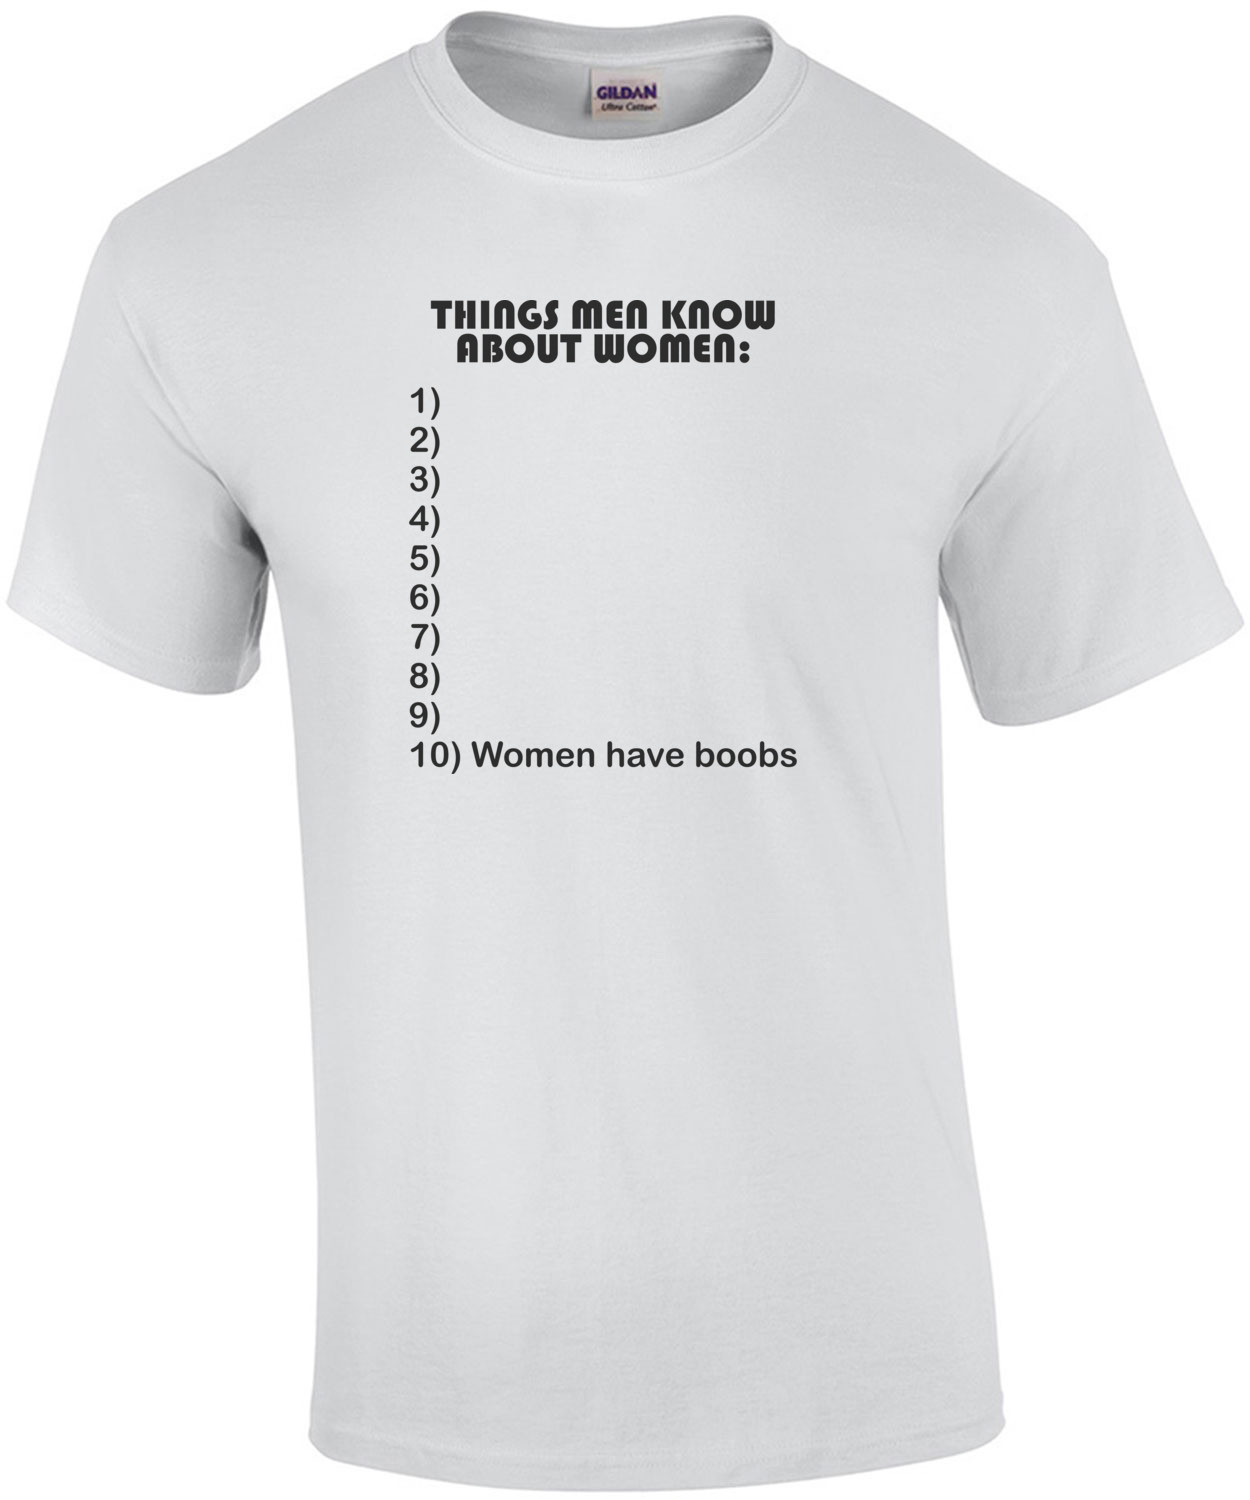 Things Men Know About Women Shirt